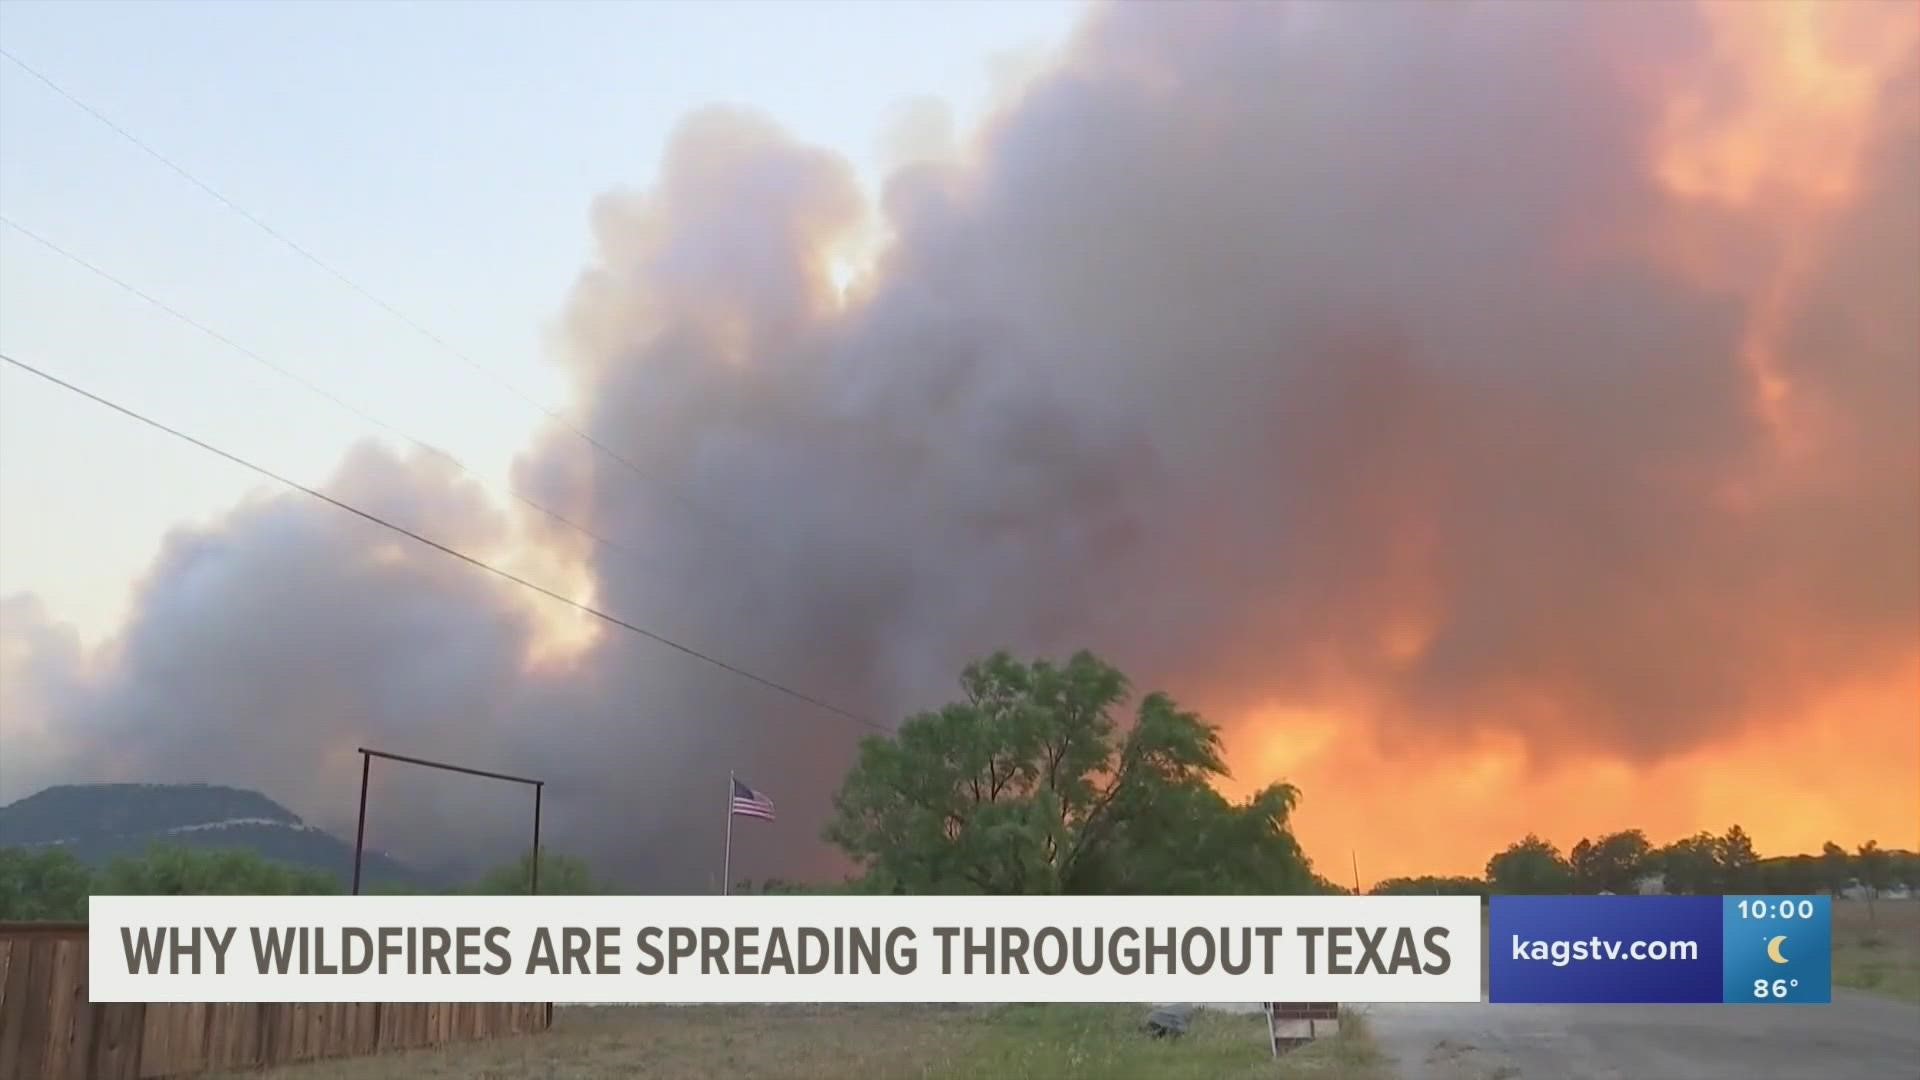 College Station Fire officials explained why the spread of wildfires are common during this time